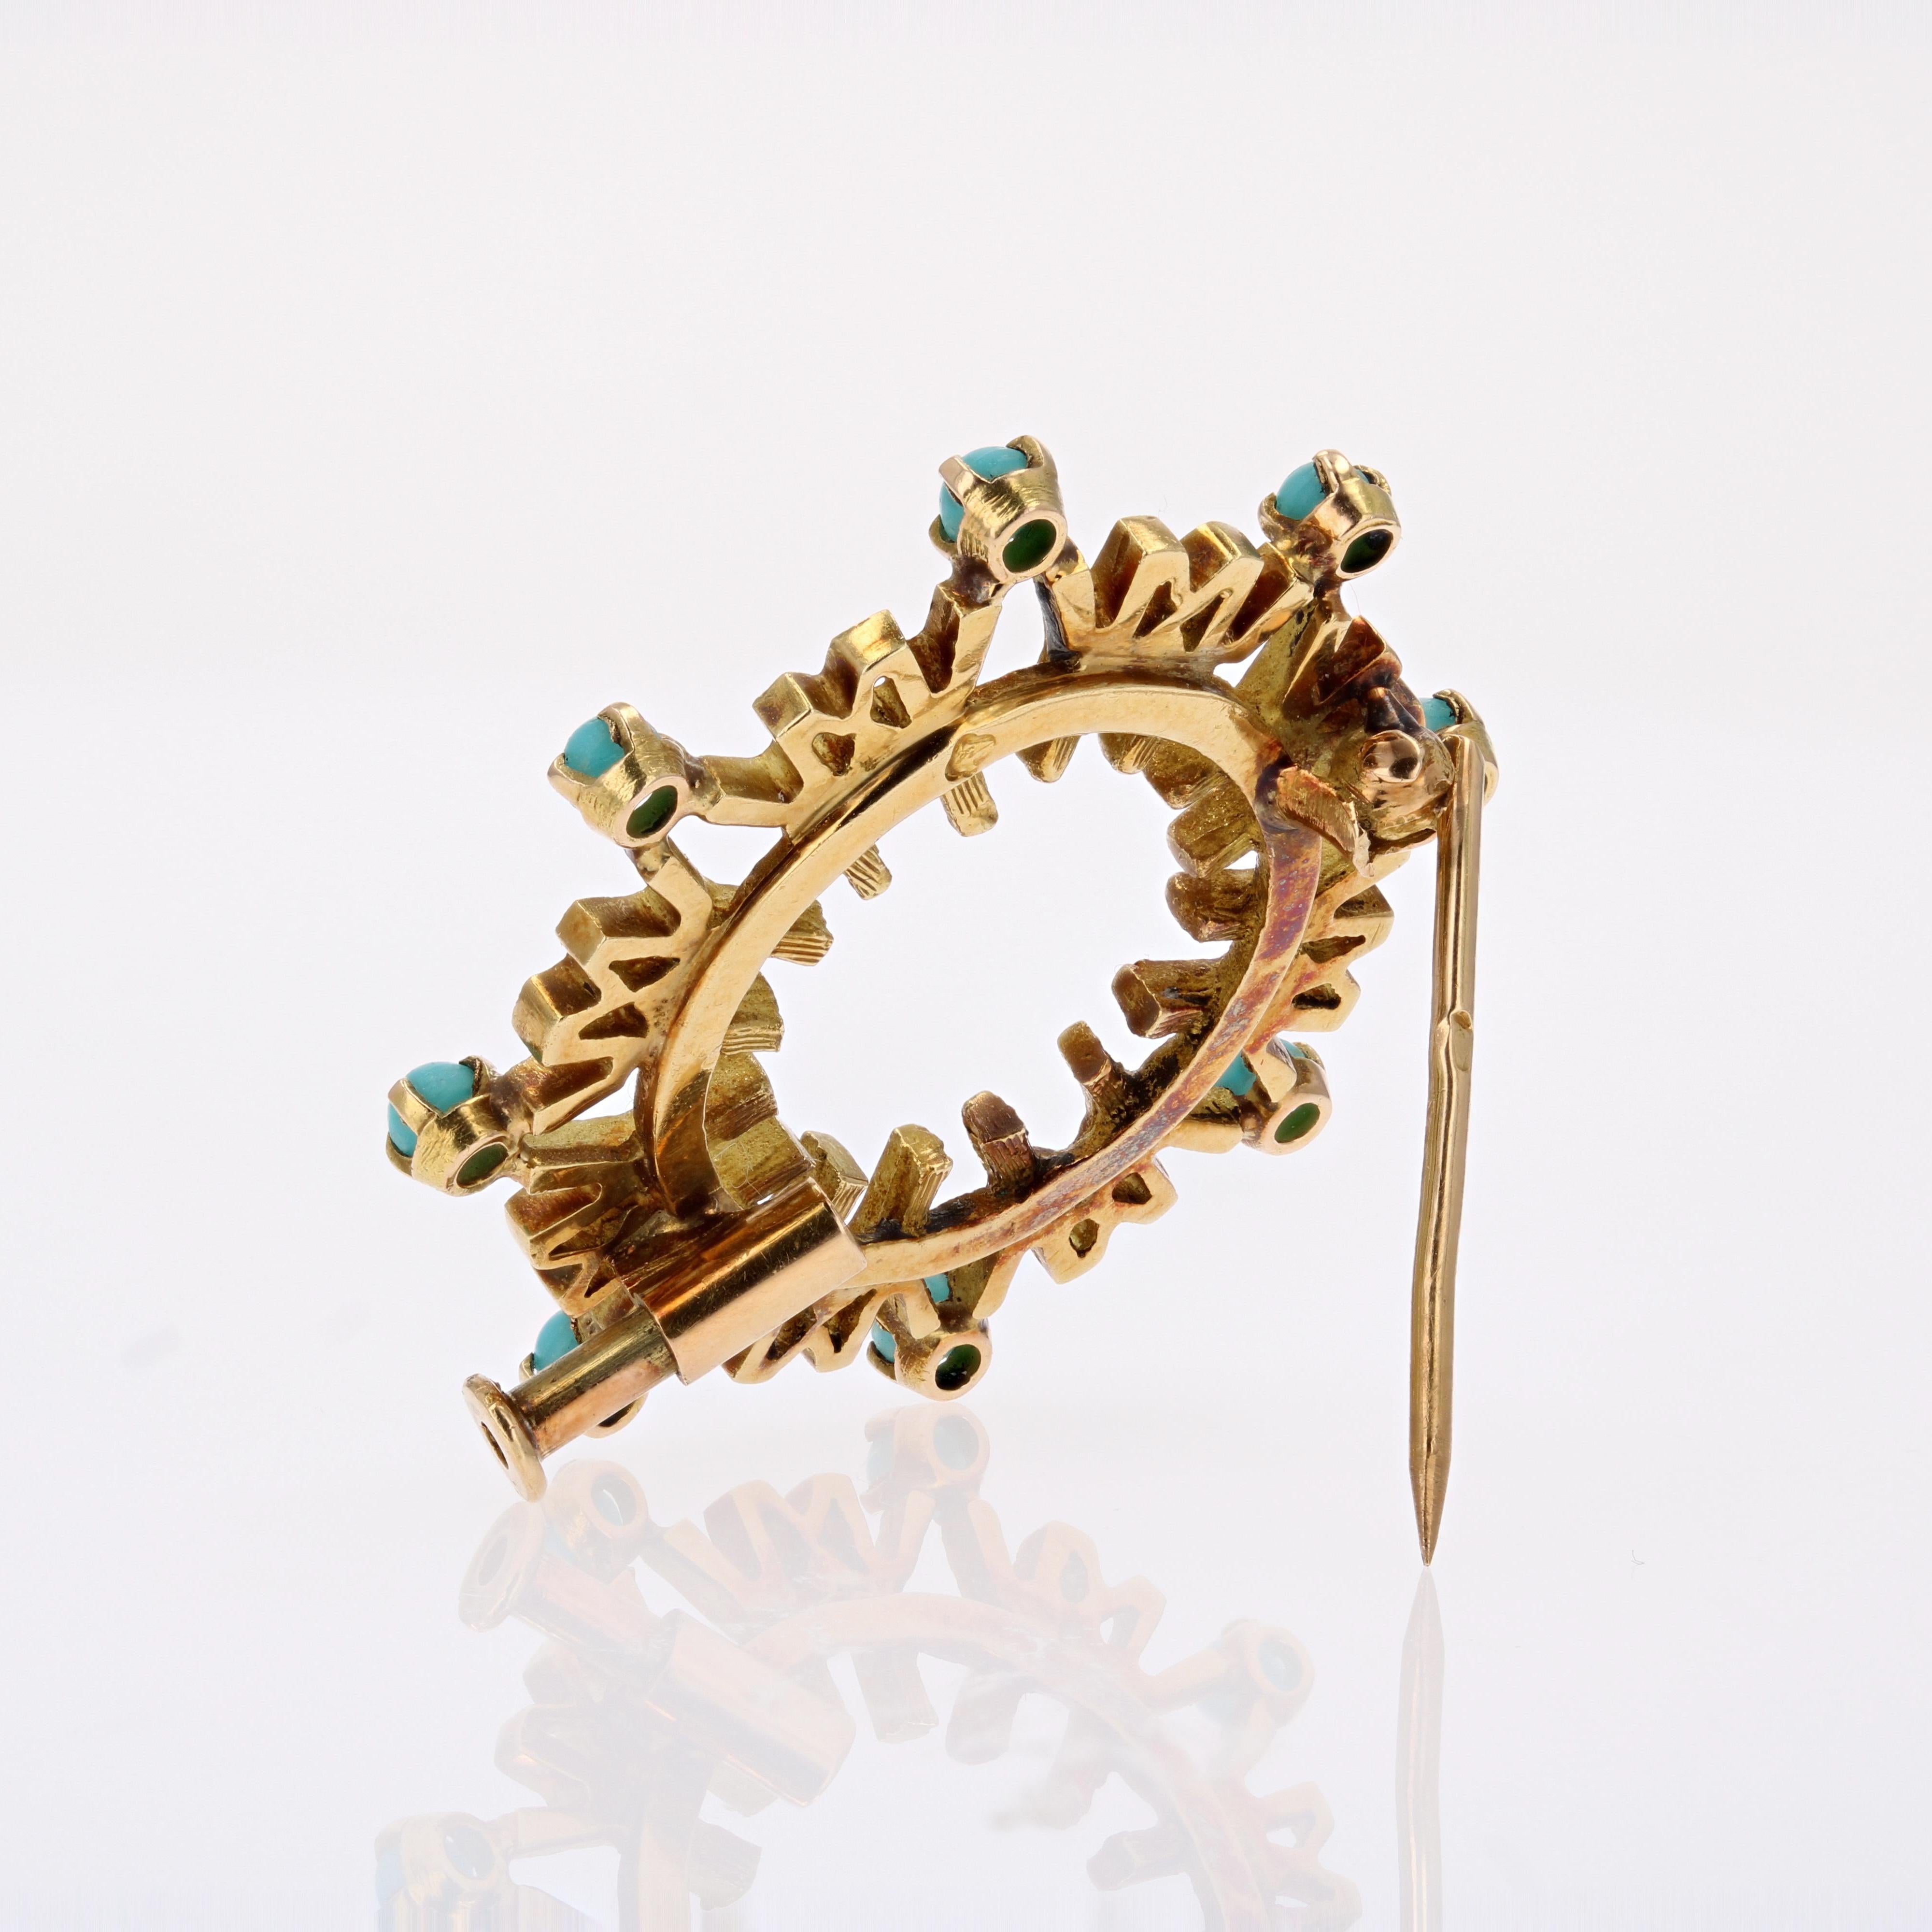 1967 Montreal Universal Exhibition Turquoise Gold Brooch 3